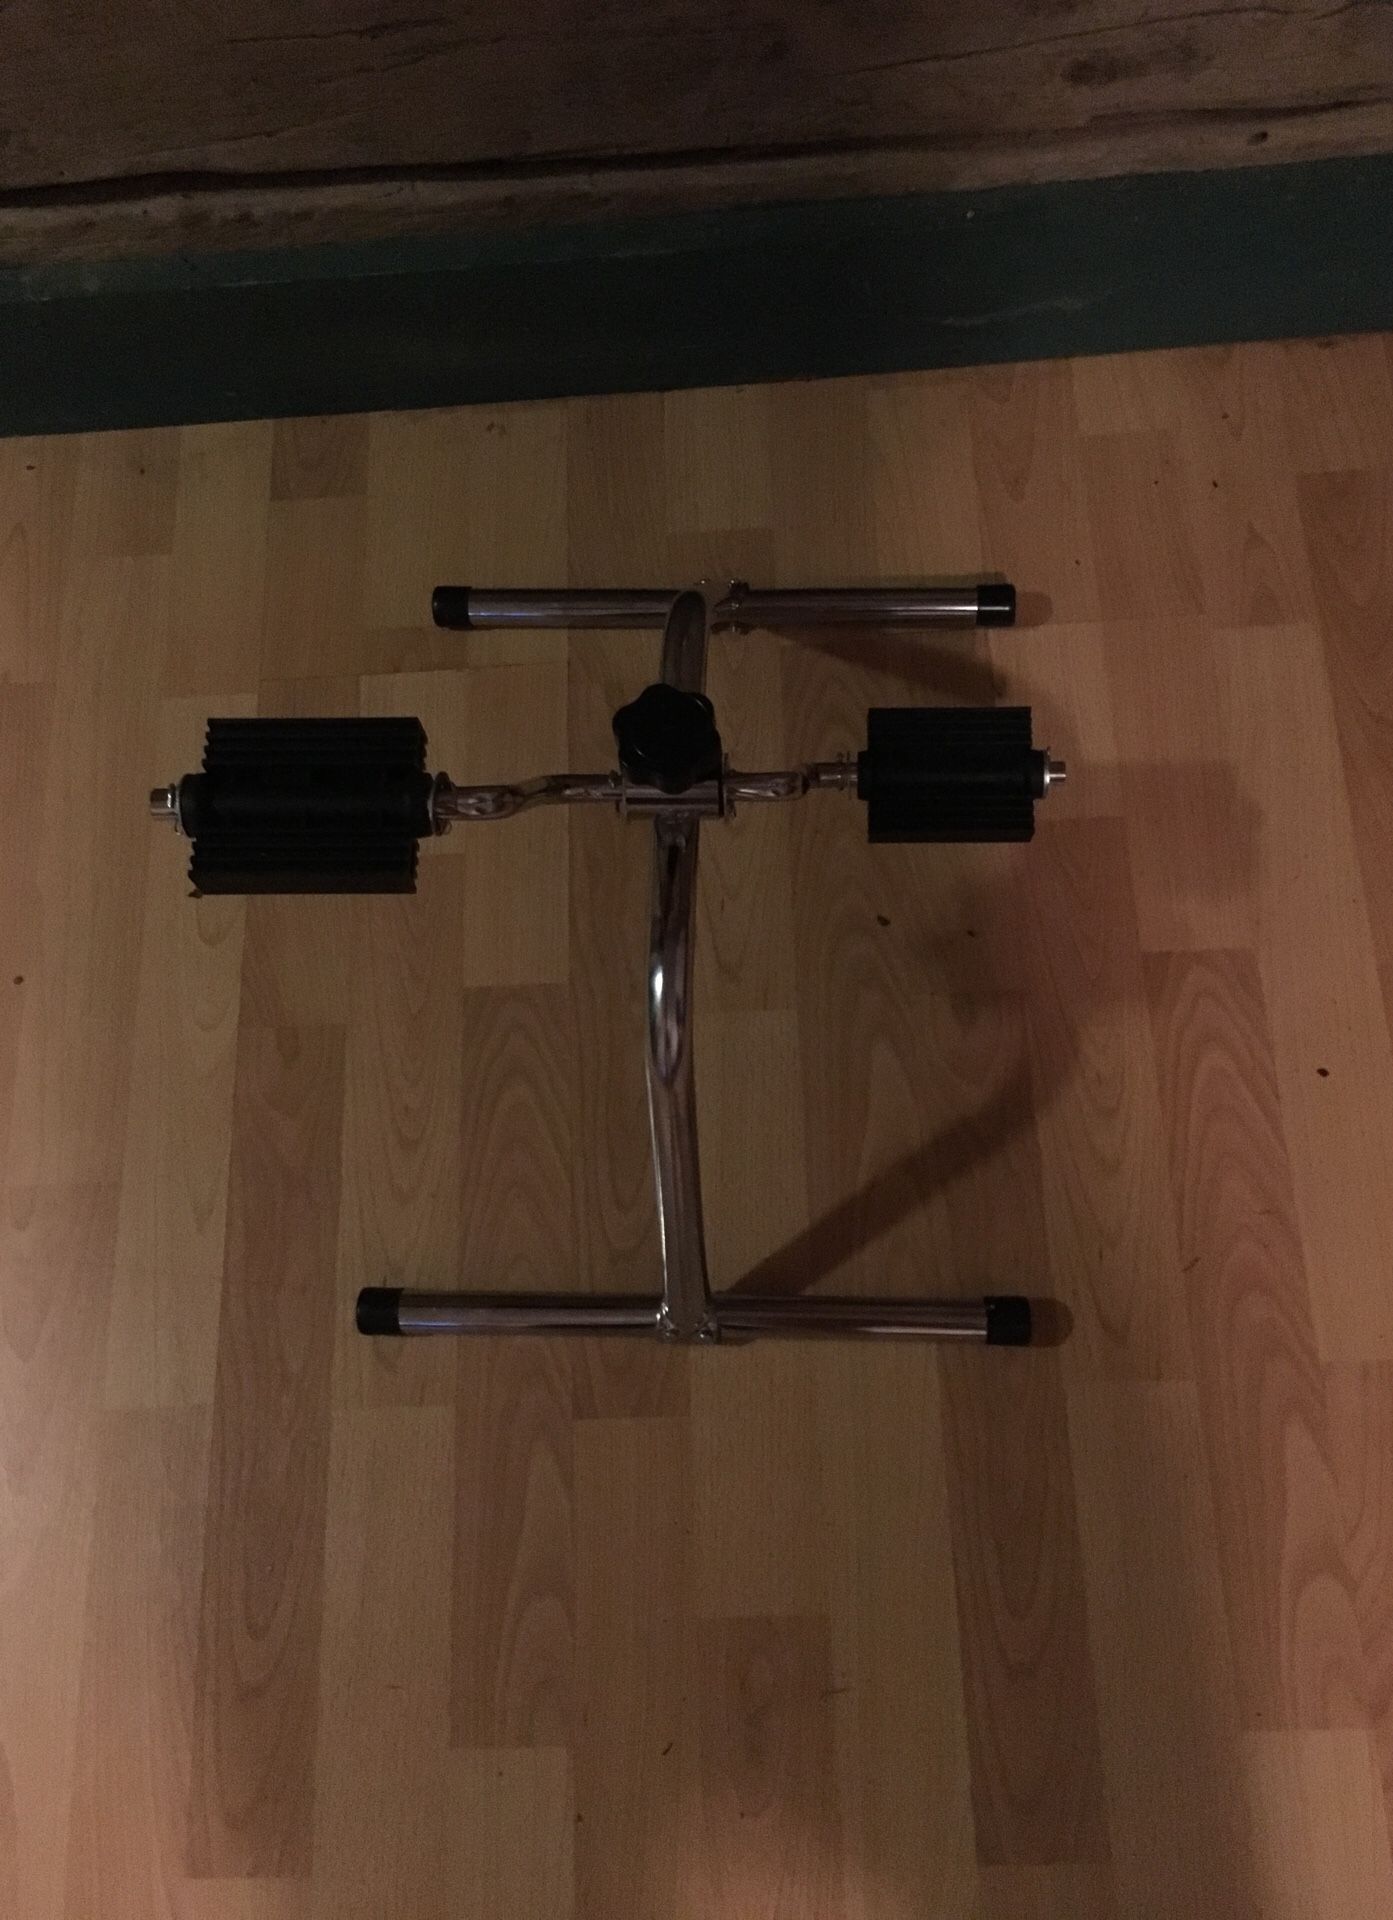 Exercise Pedals